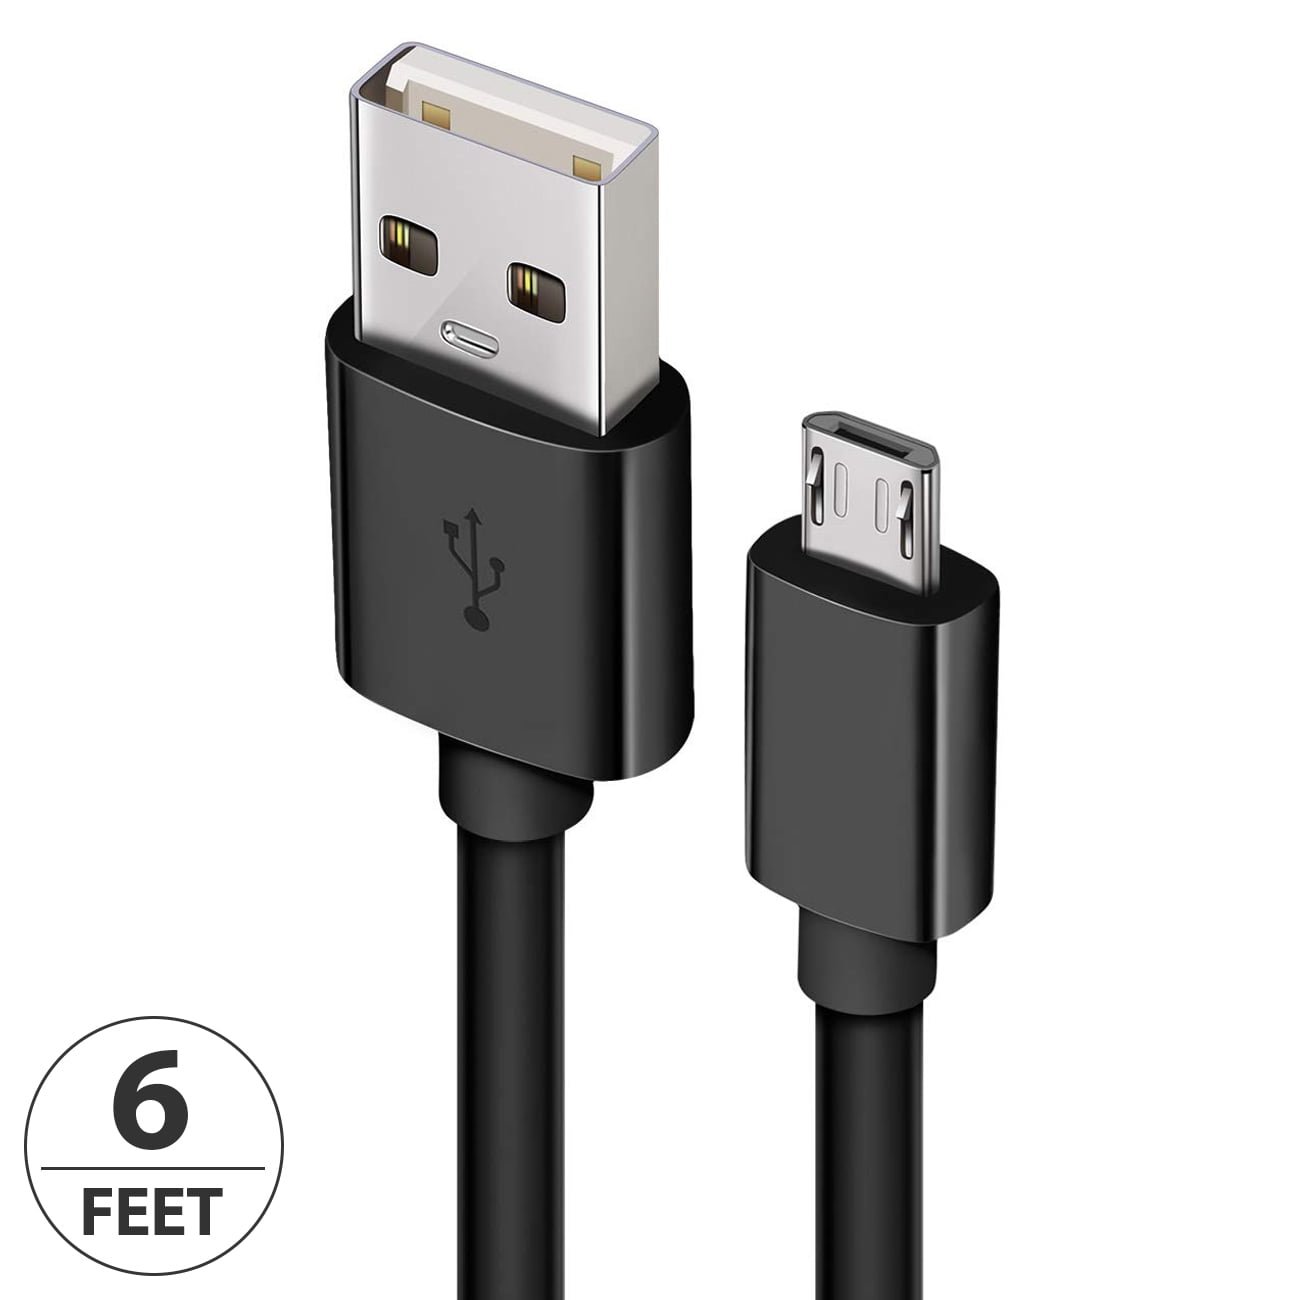 Micro USB Cable Android 3FT, Borz USB to Micro USB Cables High-Speed USB2.0 Sync and Charging Cables Galaxy S7 Edge/S6/S5/S4, Note 5/4/3HTC, Xbox, PS4, Nexus, Tablet and More -